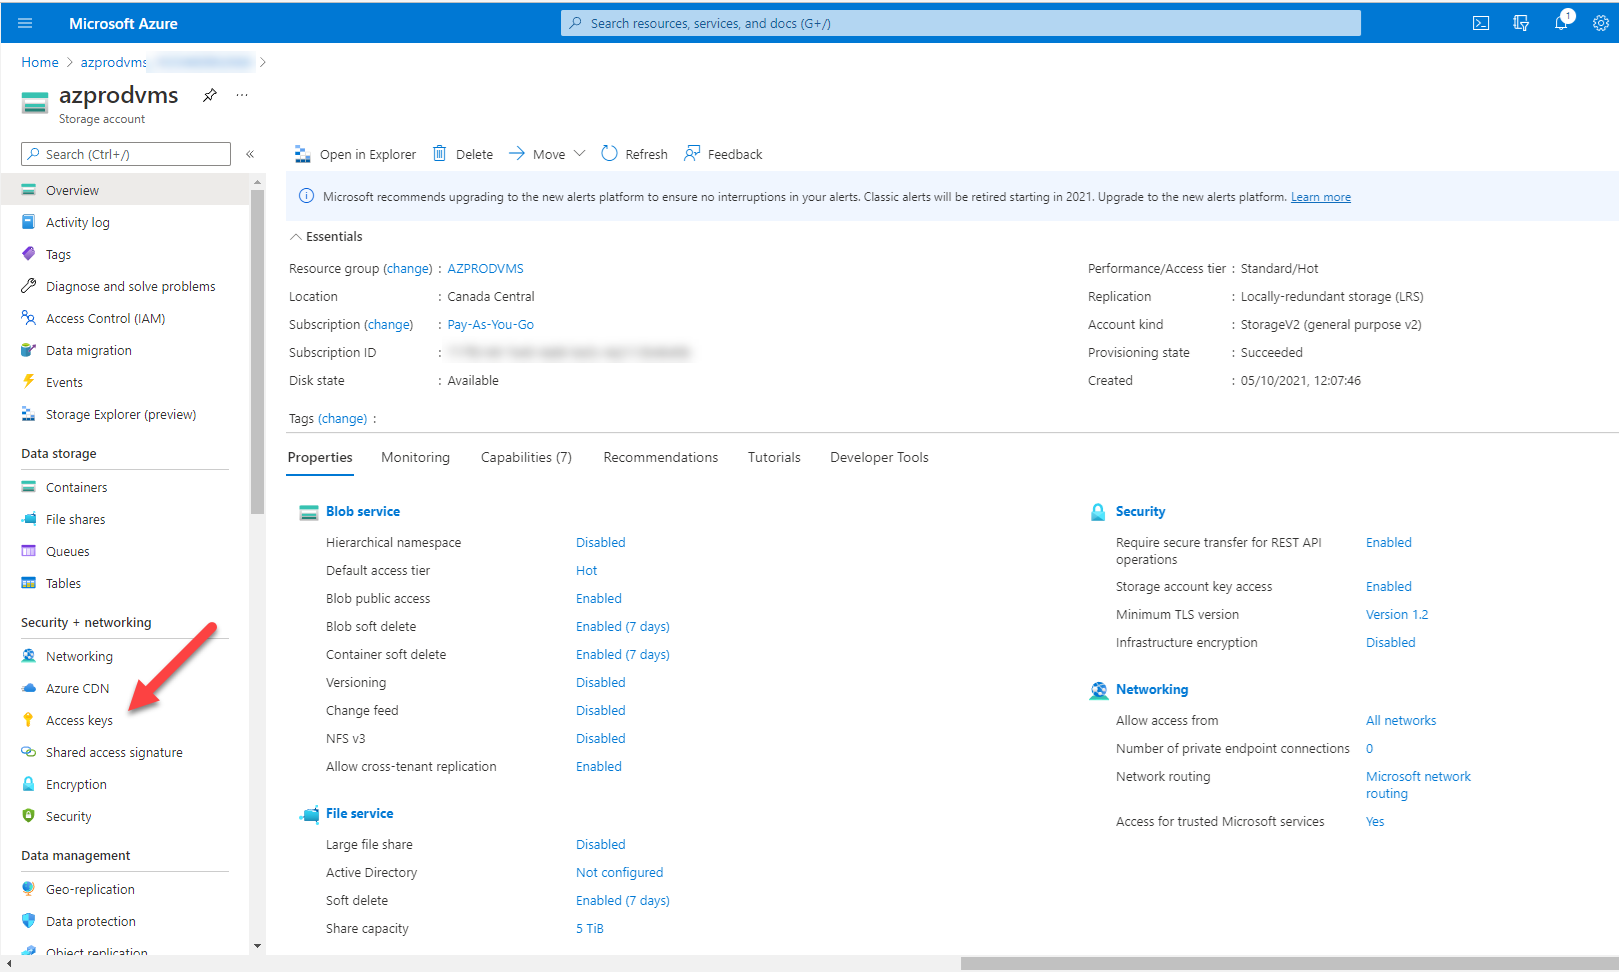 120721 1658 HowtouseVee11 - How to use Veeam to Restore On-Premises VM to Azure